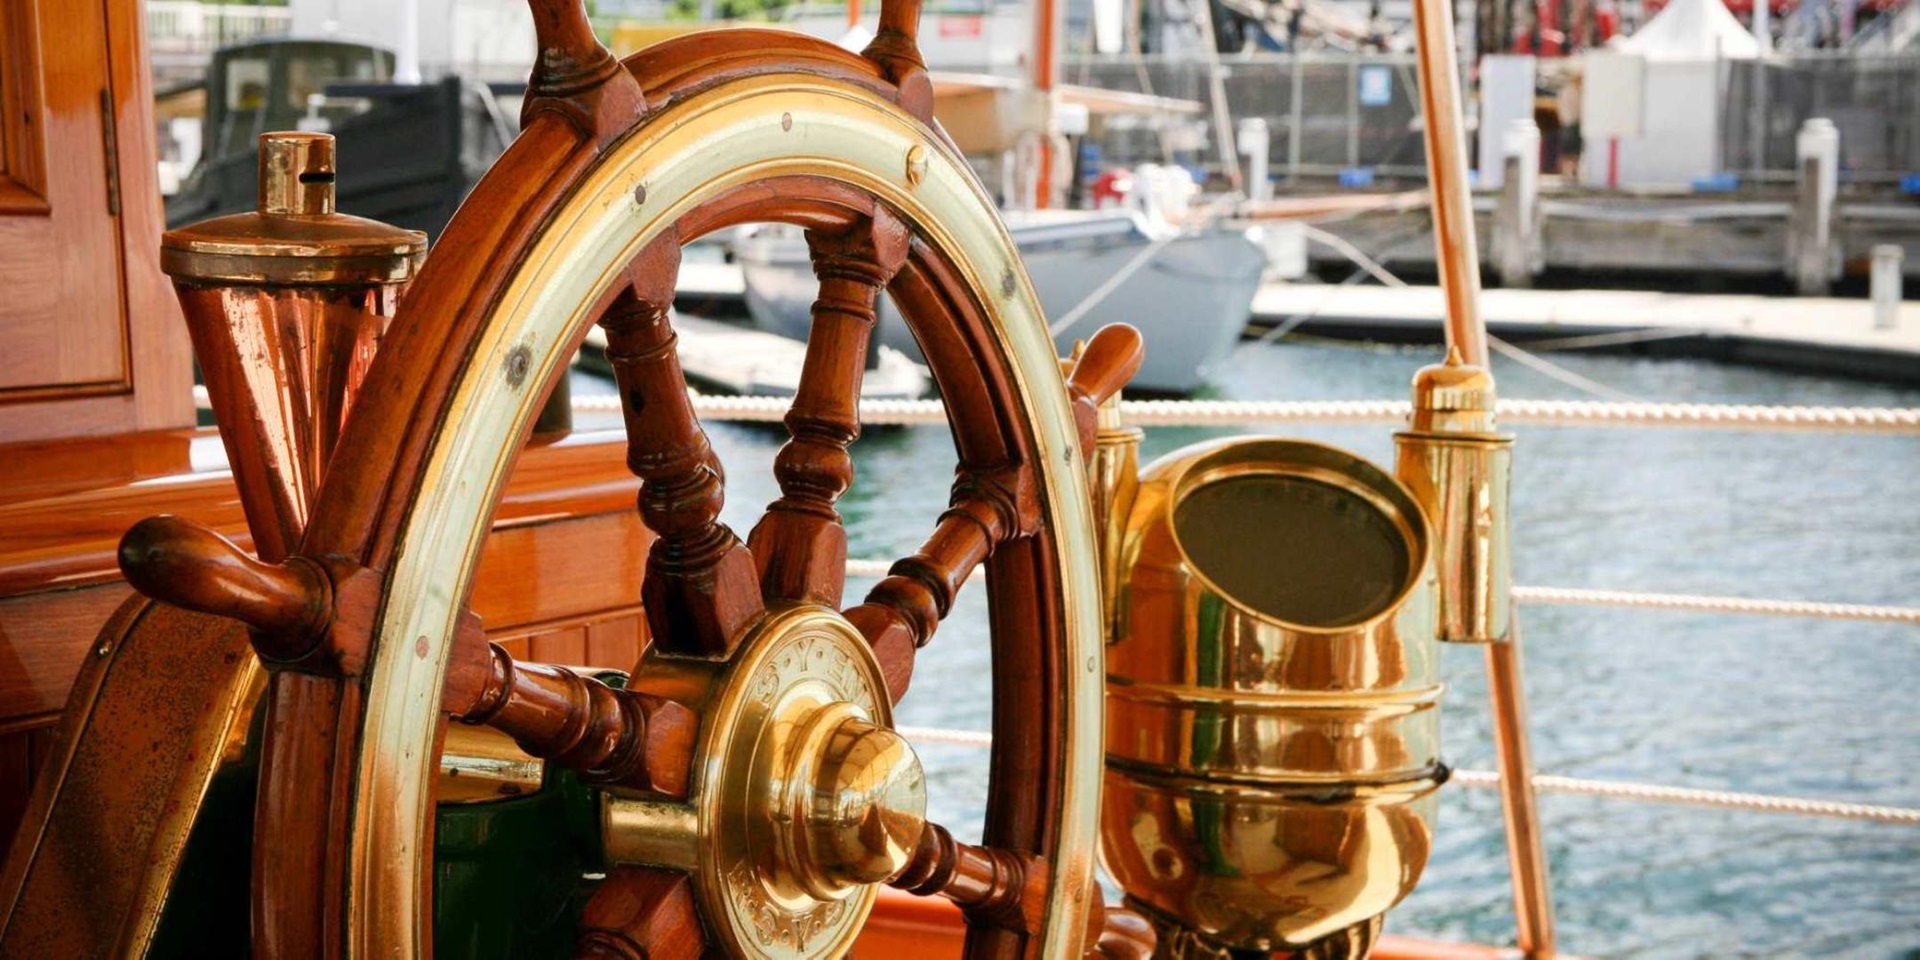 SY Ena is one of the finest Edwardian steam yachts in the world